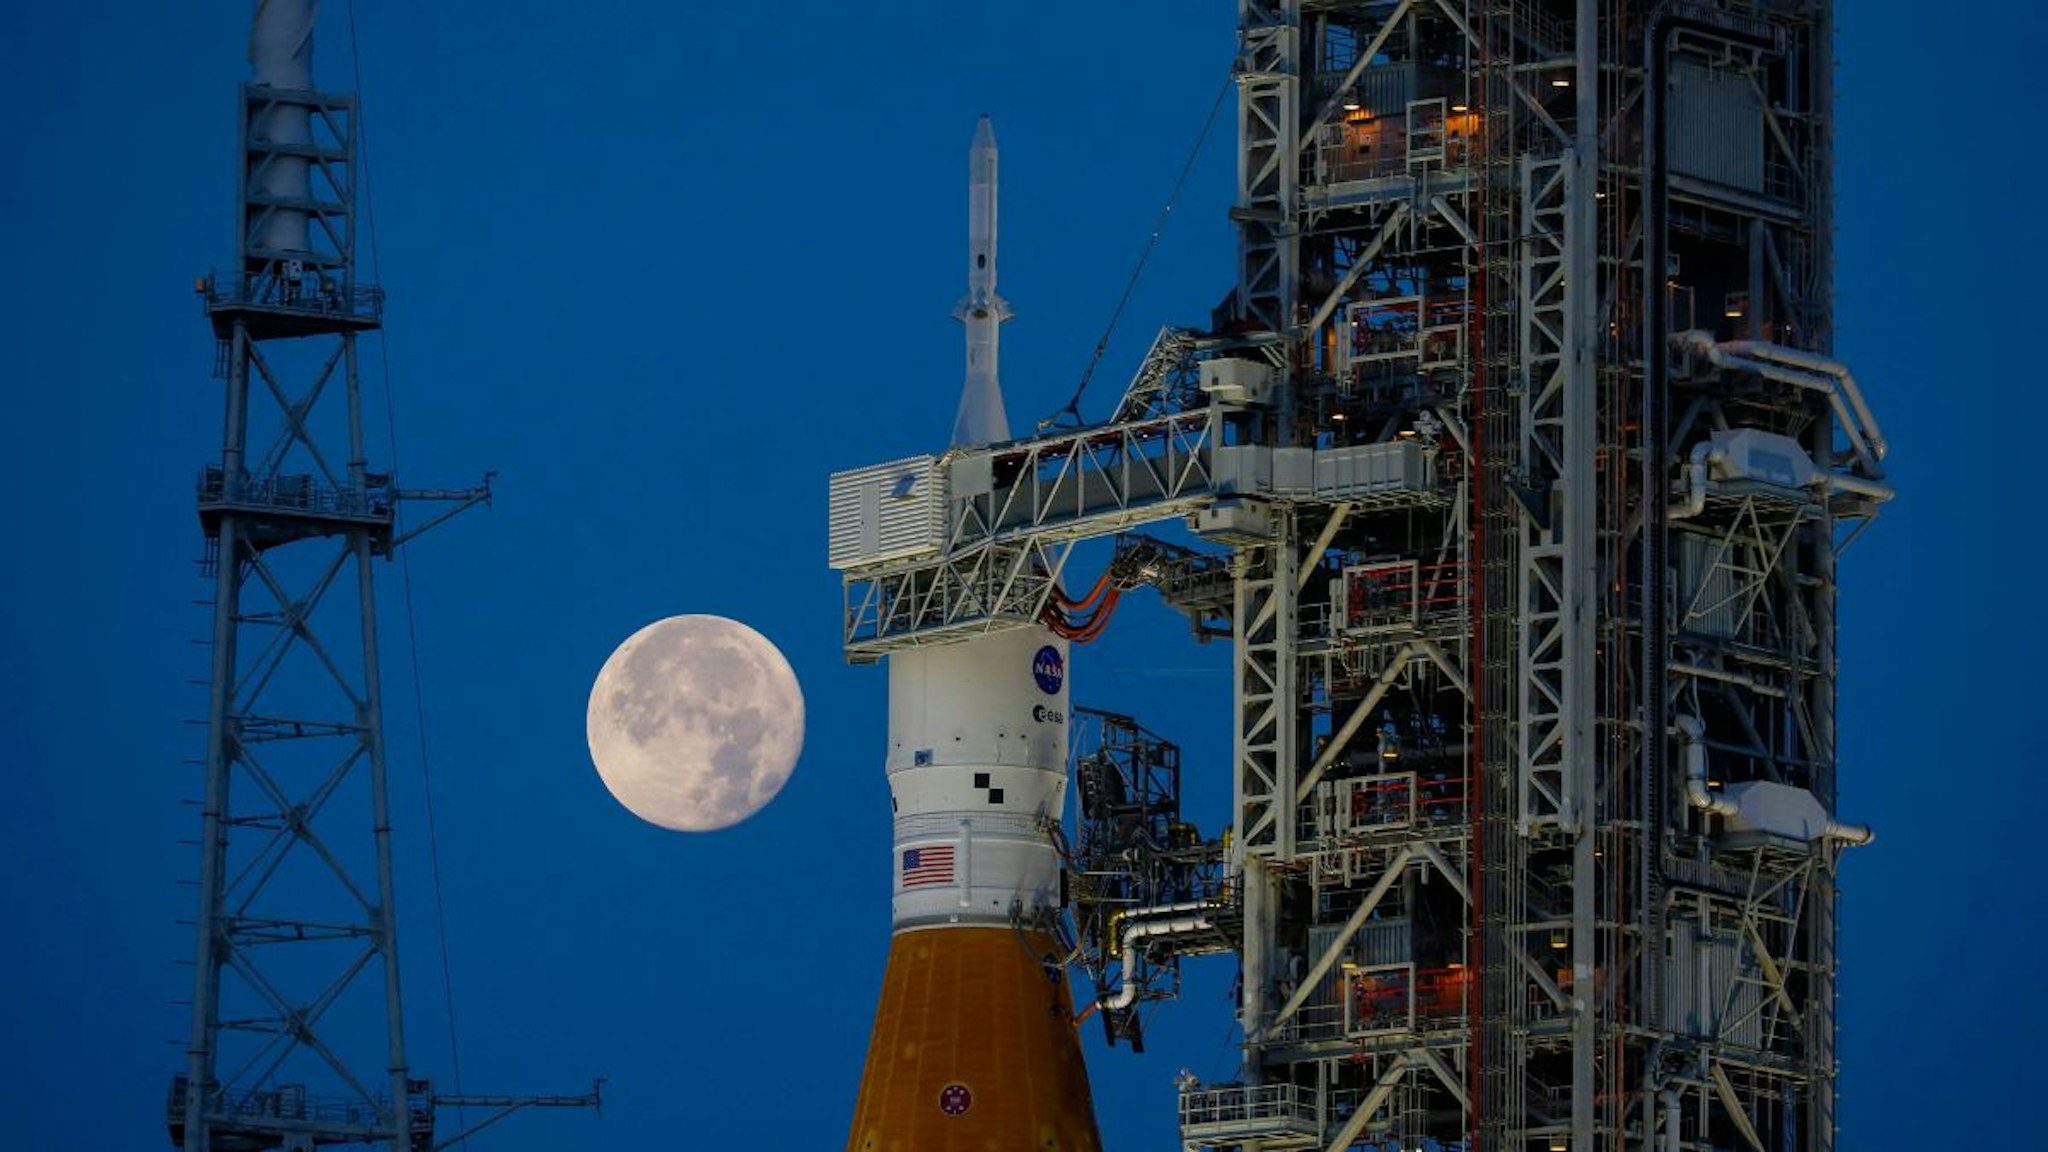 NASAs Artemis I Moon rocket sits at Launch Pad Complex 39B at Kennedy Space Center, in Cape Canaveral, Florida, on June 15, 2022.